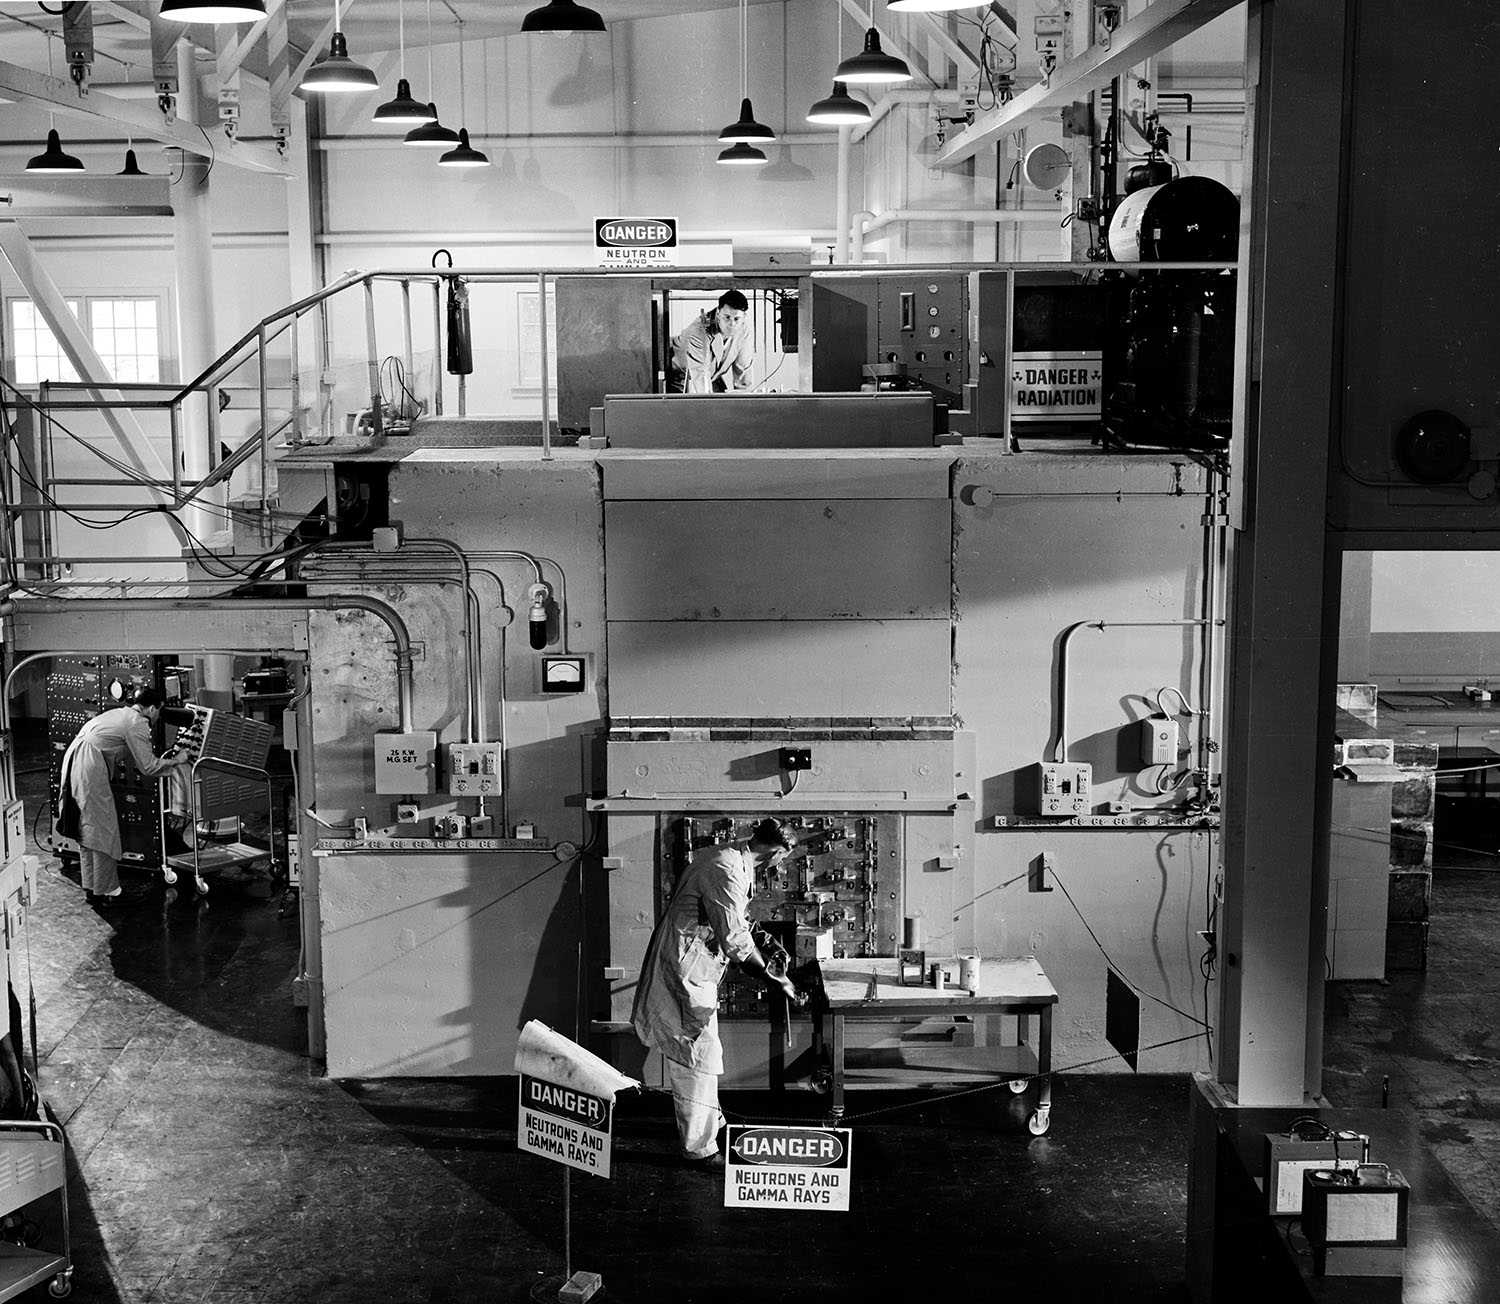 The SUPO, the most powerful version of the Water Boiler Reactor, at Los Alamos, in the 1950s. Image courtesy of Los Alamos National Laboratory.